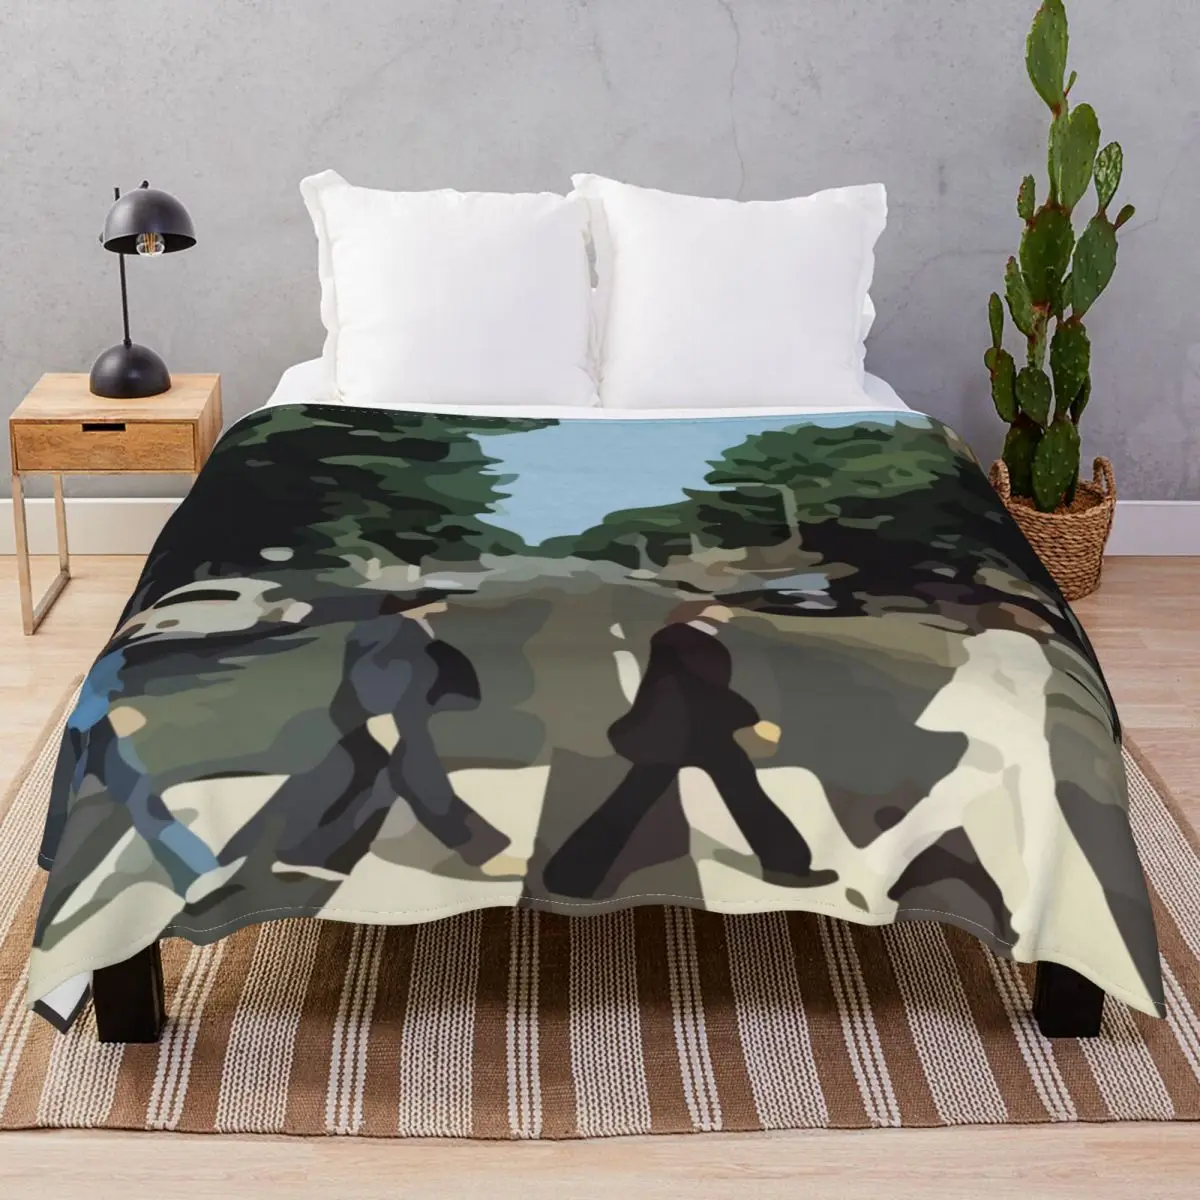 Abbey Road Album Cover Blankets Fleece Print Super Warm Throw Blanket for Bedding Home Couch Camp Office